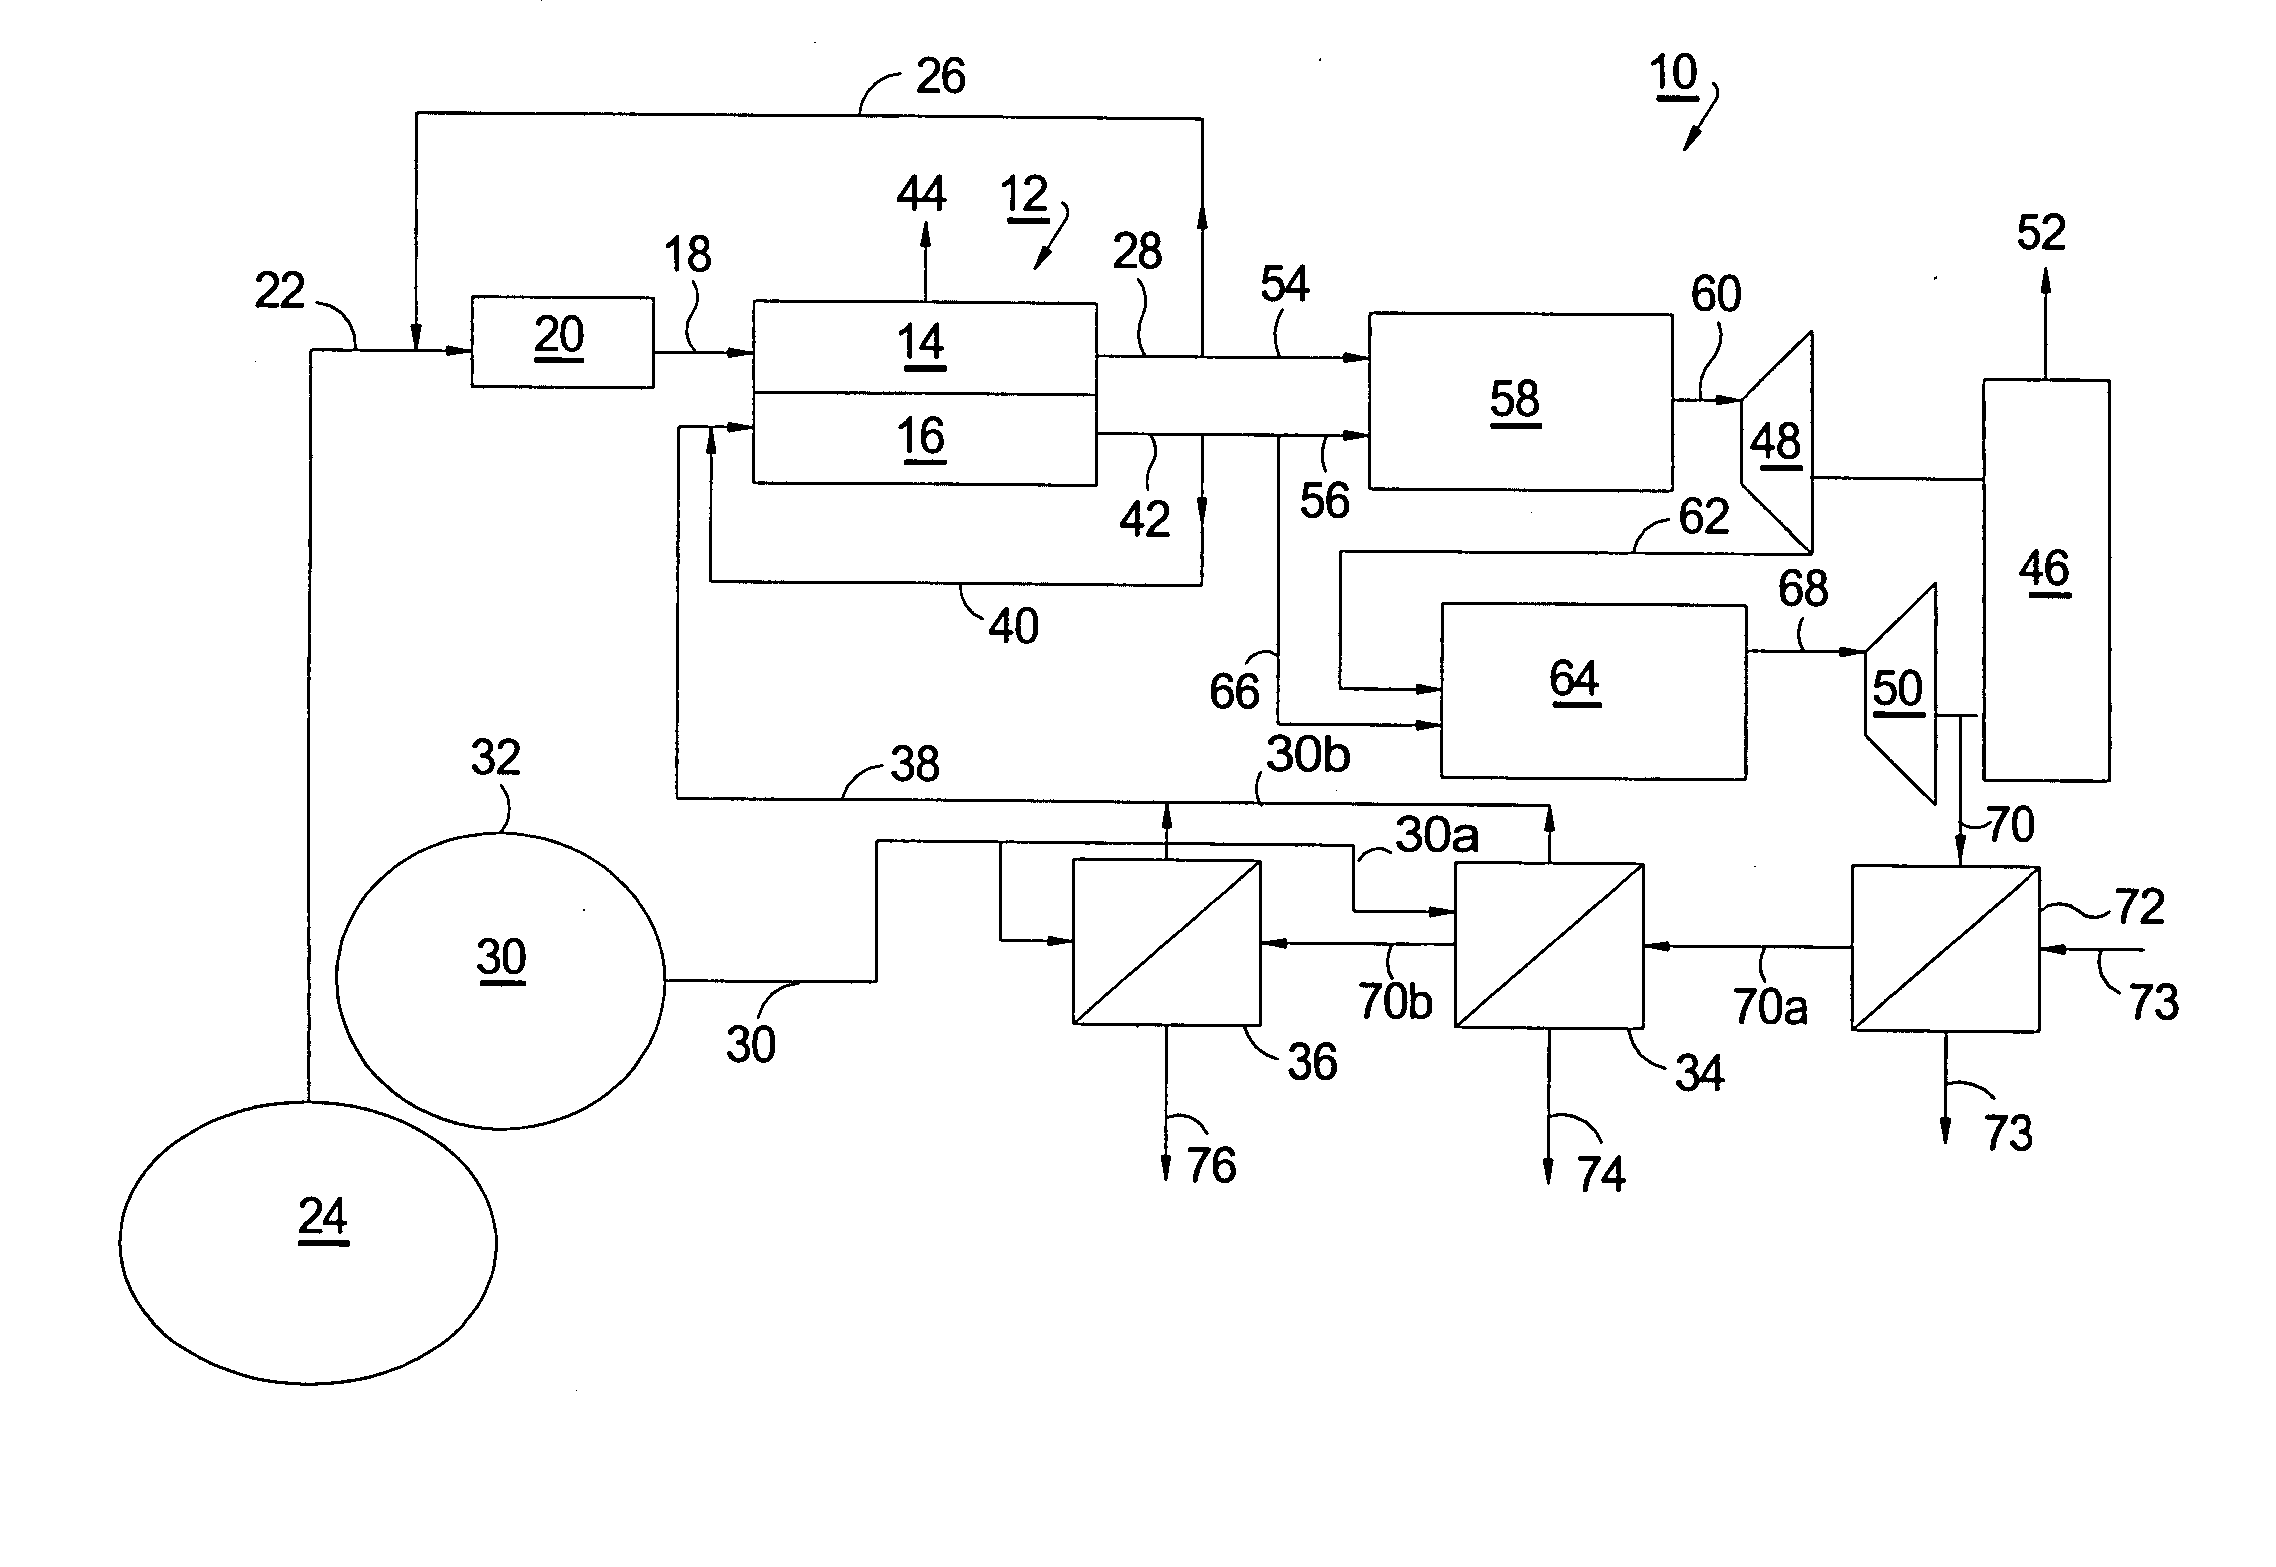 Hybrid solid oxide fuel cell and gas turbine electric generating system using liquid oxygen